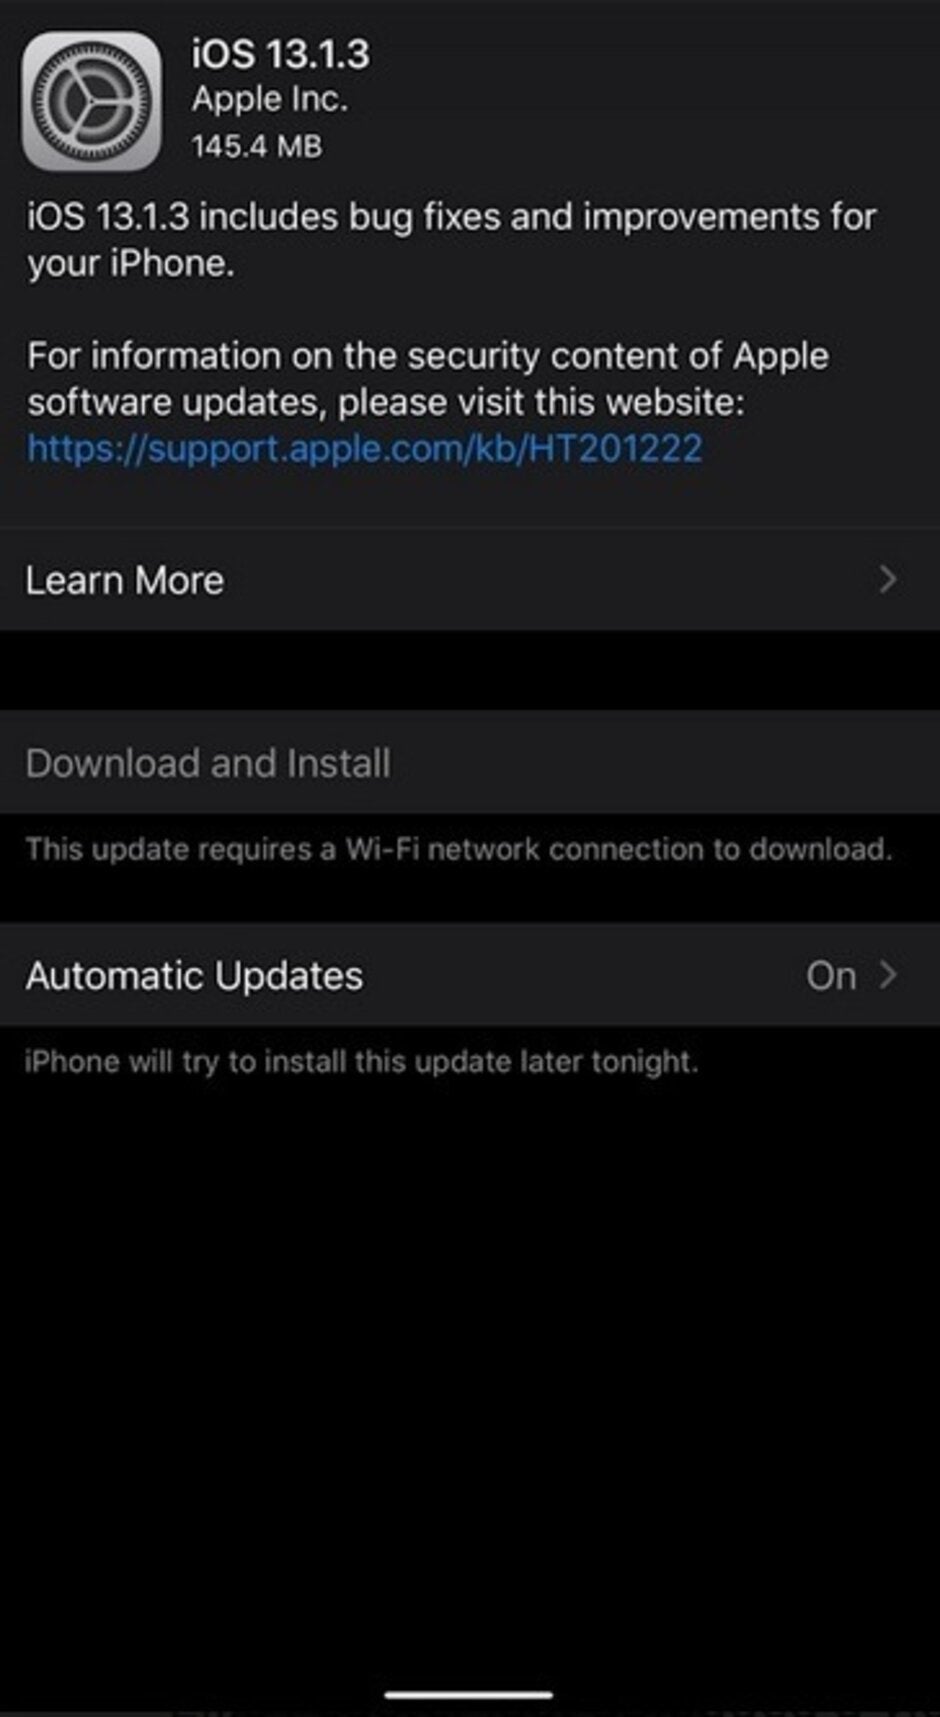 Apple pushes out iOS 13.1.3 and iPadOS 13.1.3 to exterminate bugs and improve device performance - Apple's latest iOS update is released so that iPhone users won't miss a call